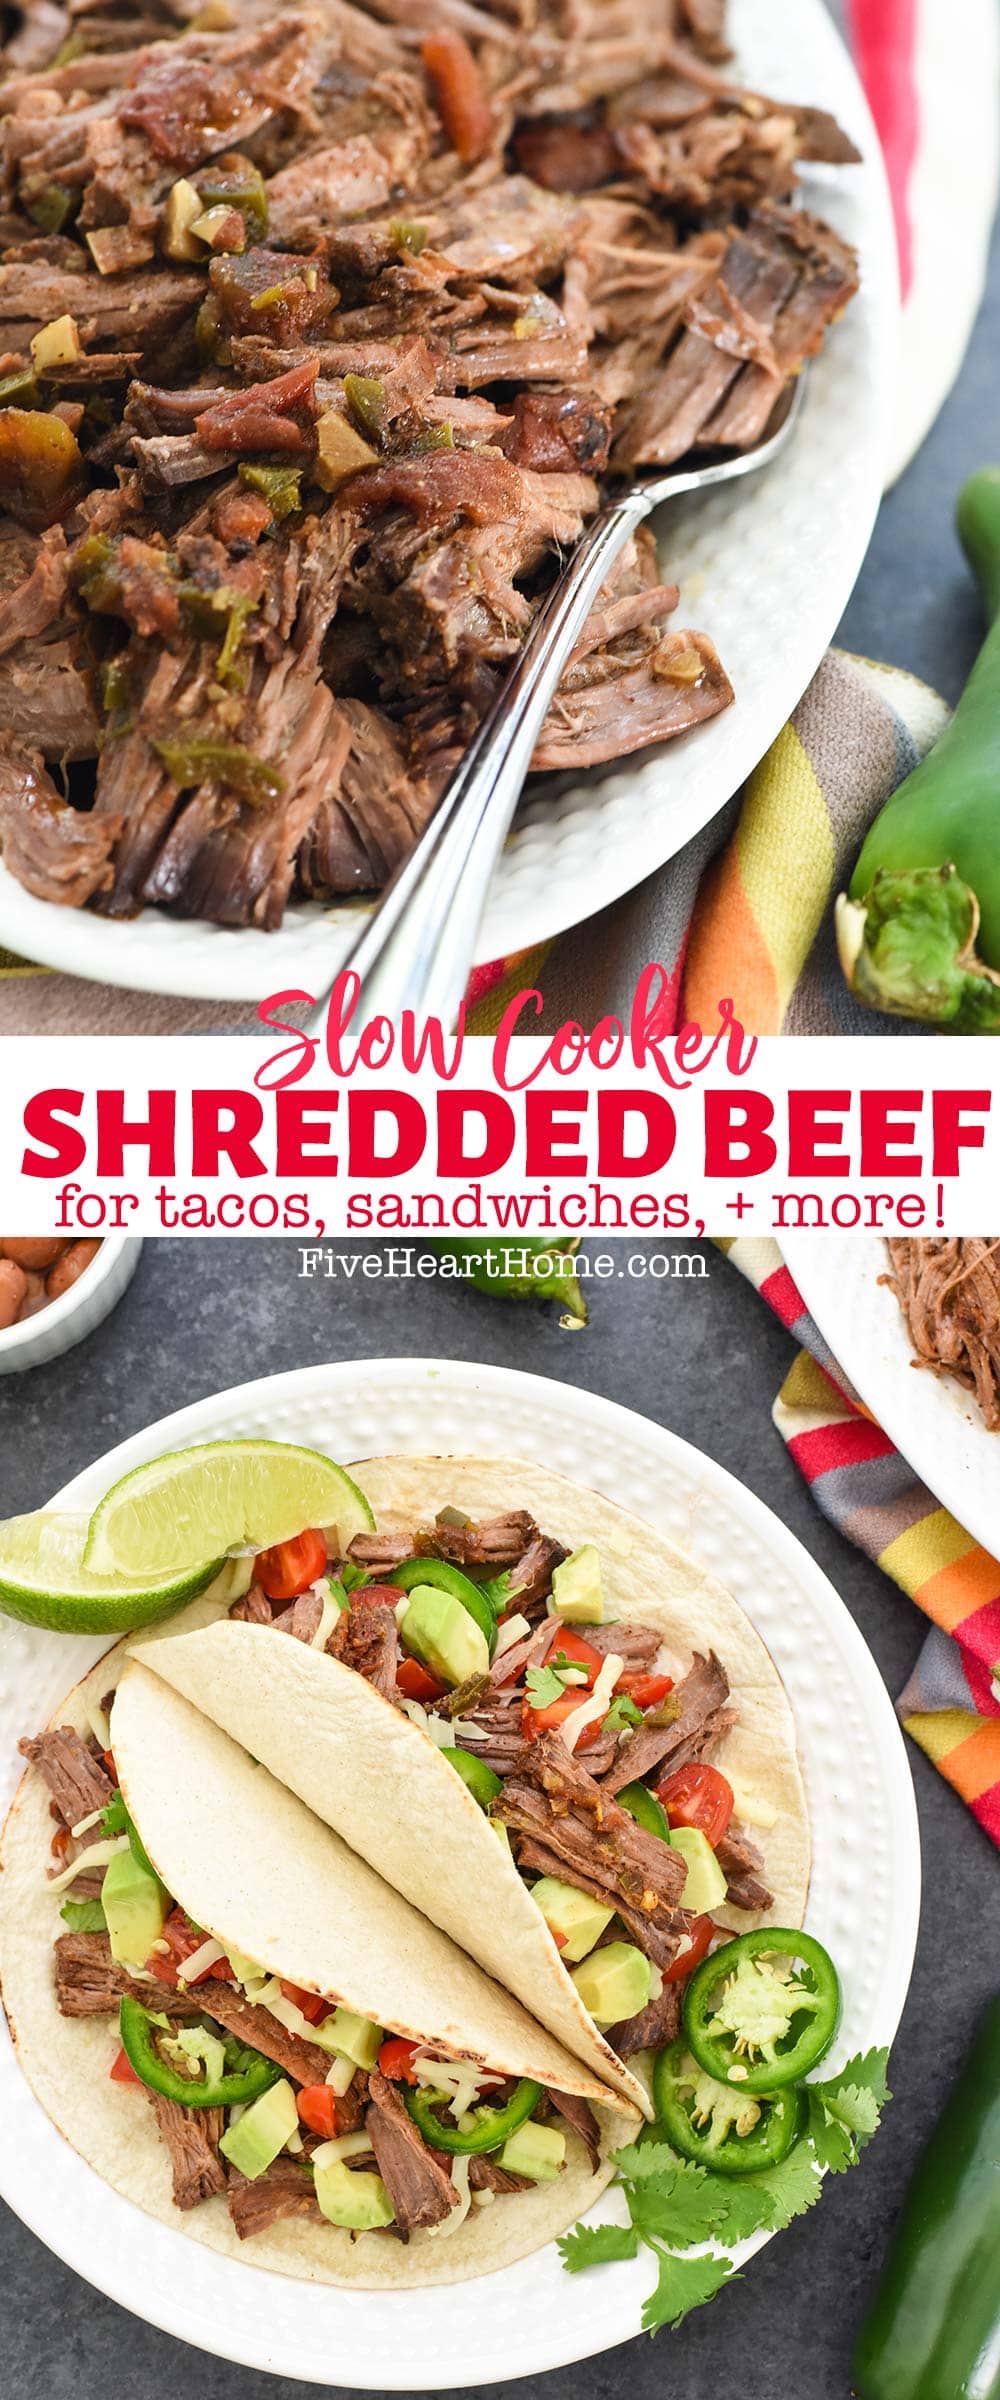 Shredded Beef ~ this mouthwatering, effortless, versatile crock pot recipe is infused with Mexican flavors and perfect for everything from tacos to nachos to sandwiches and so much more!| FiveHeartHome.com via @fivehearthome